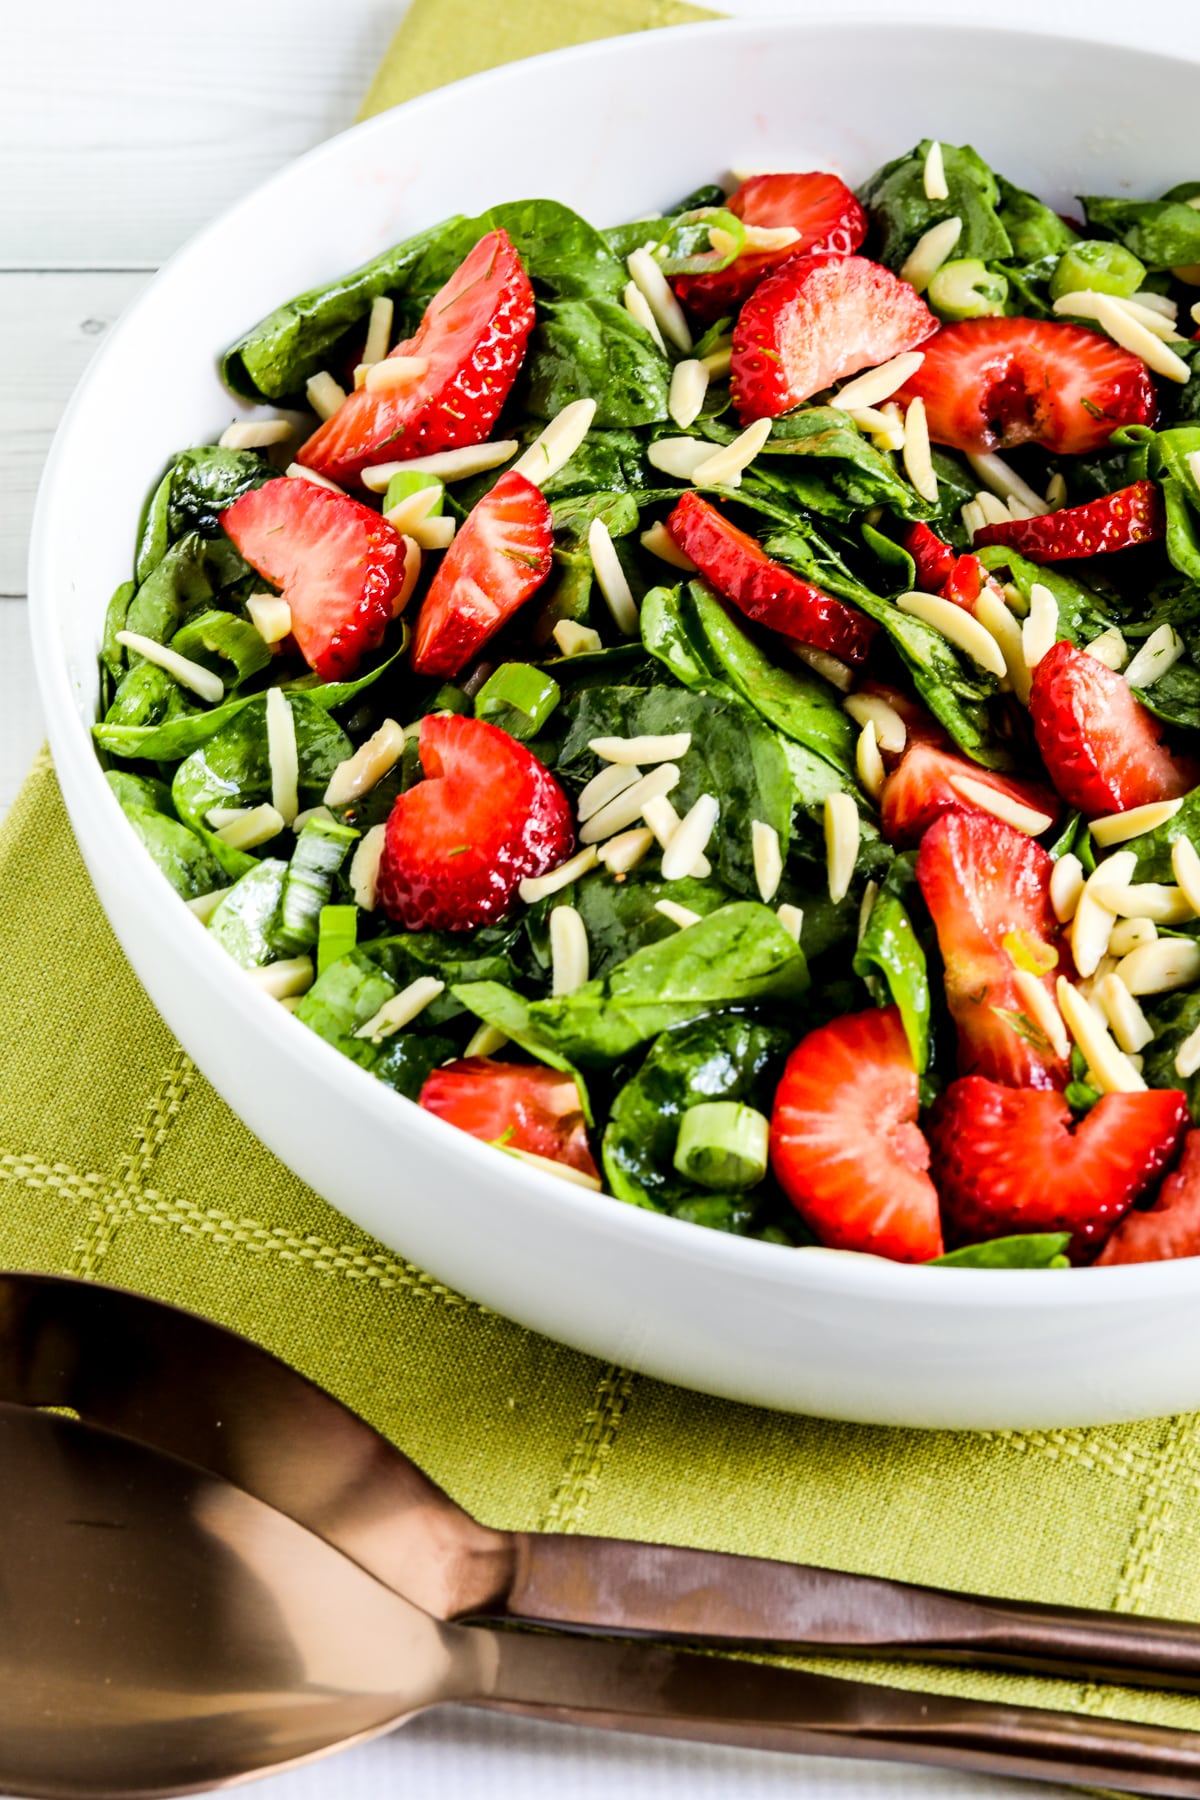 Strawberry and spinach salad shown in a serving bowl.